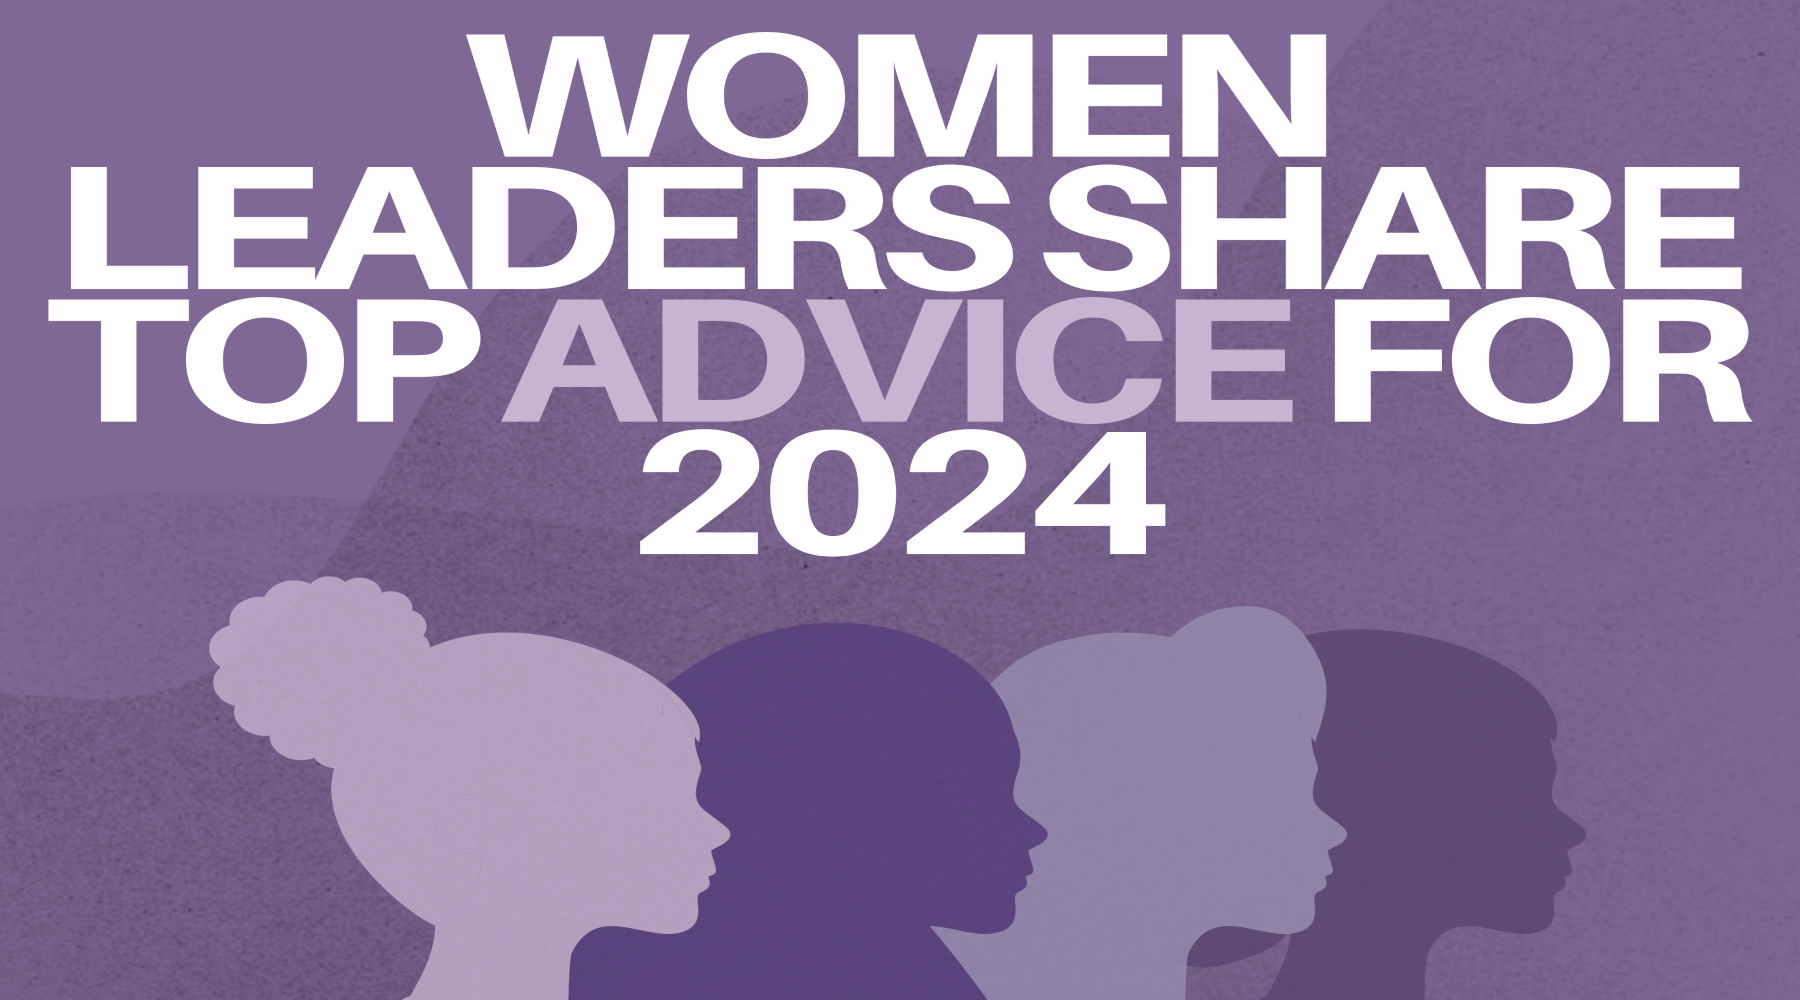 Sherry Chris, Tami Bonnell, women leaders share top advice for 2024